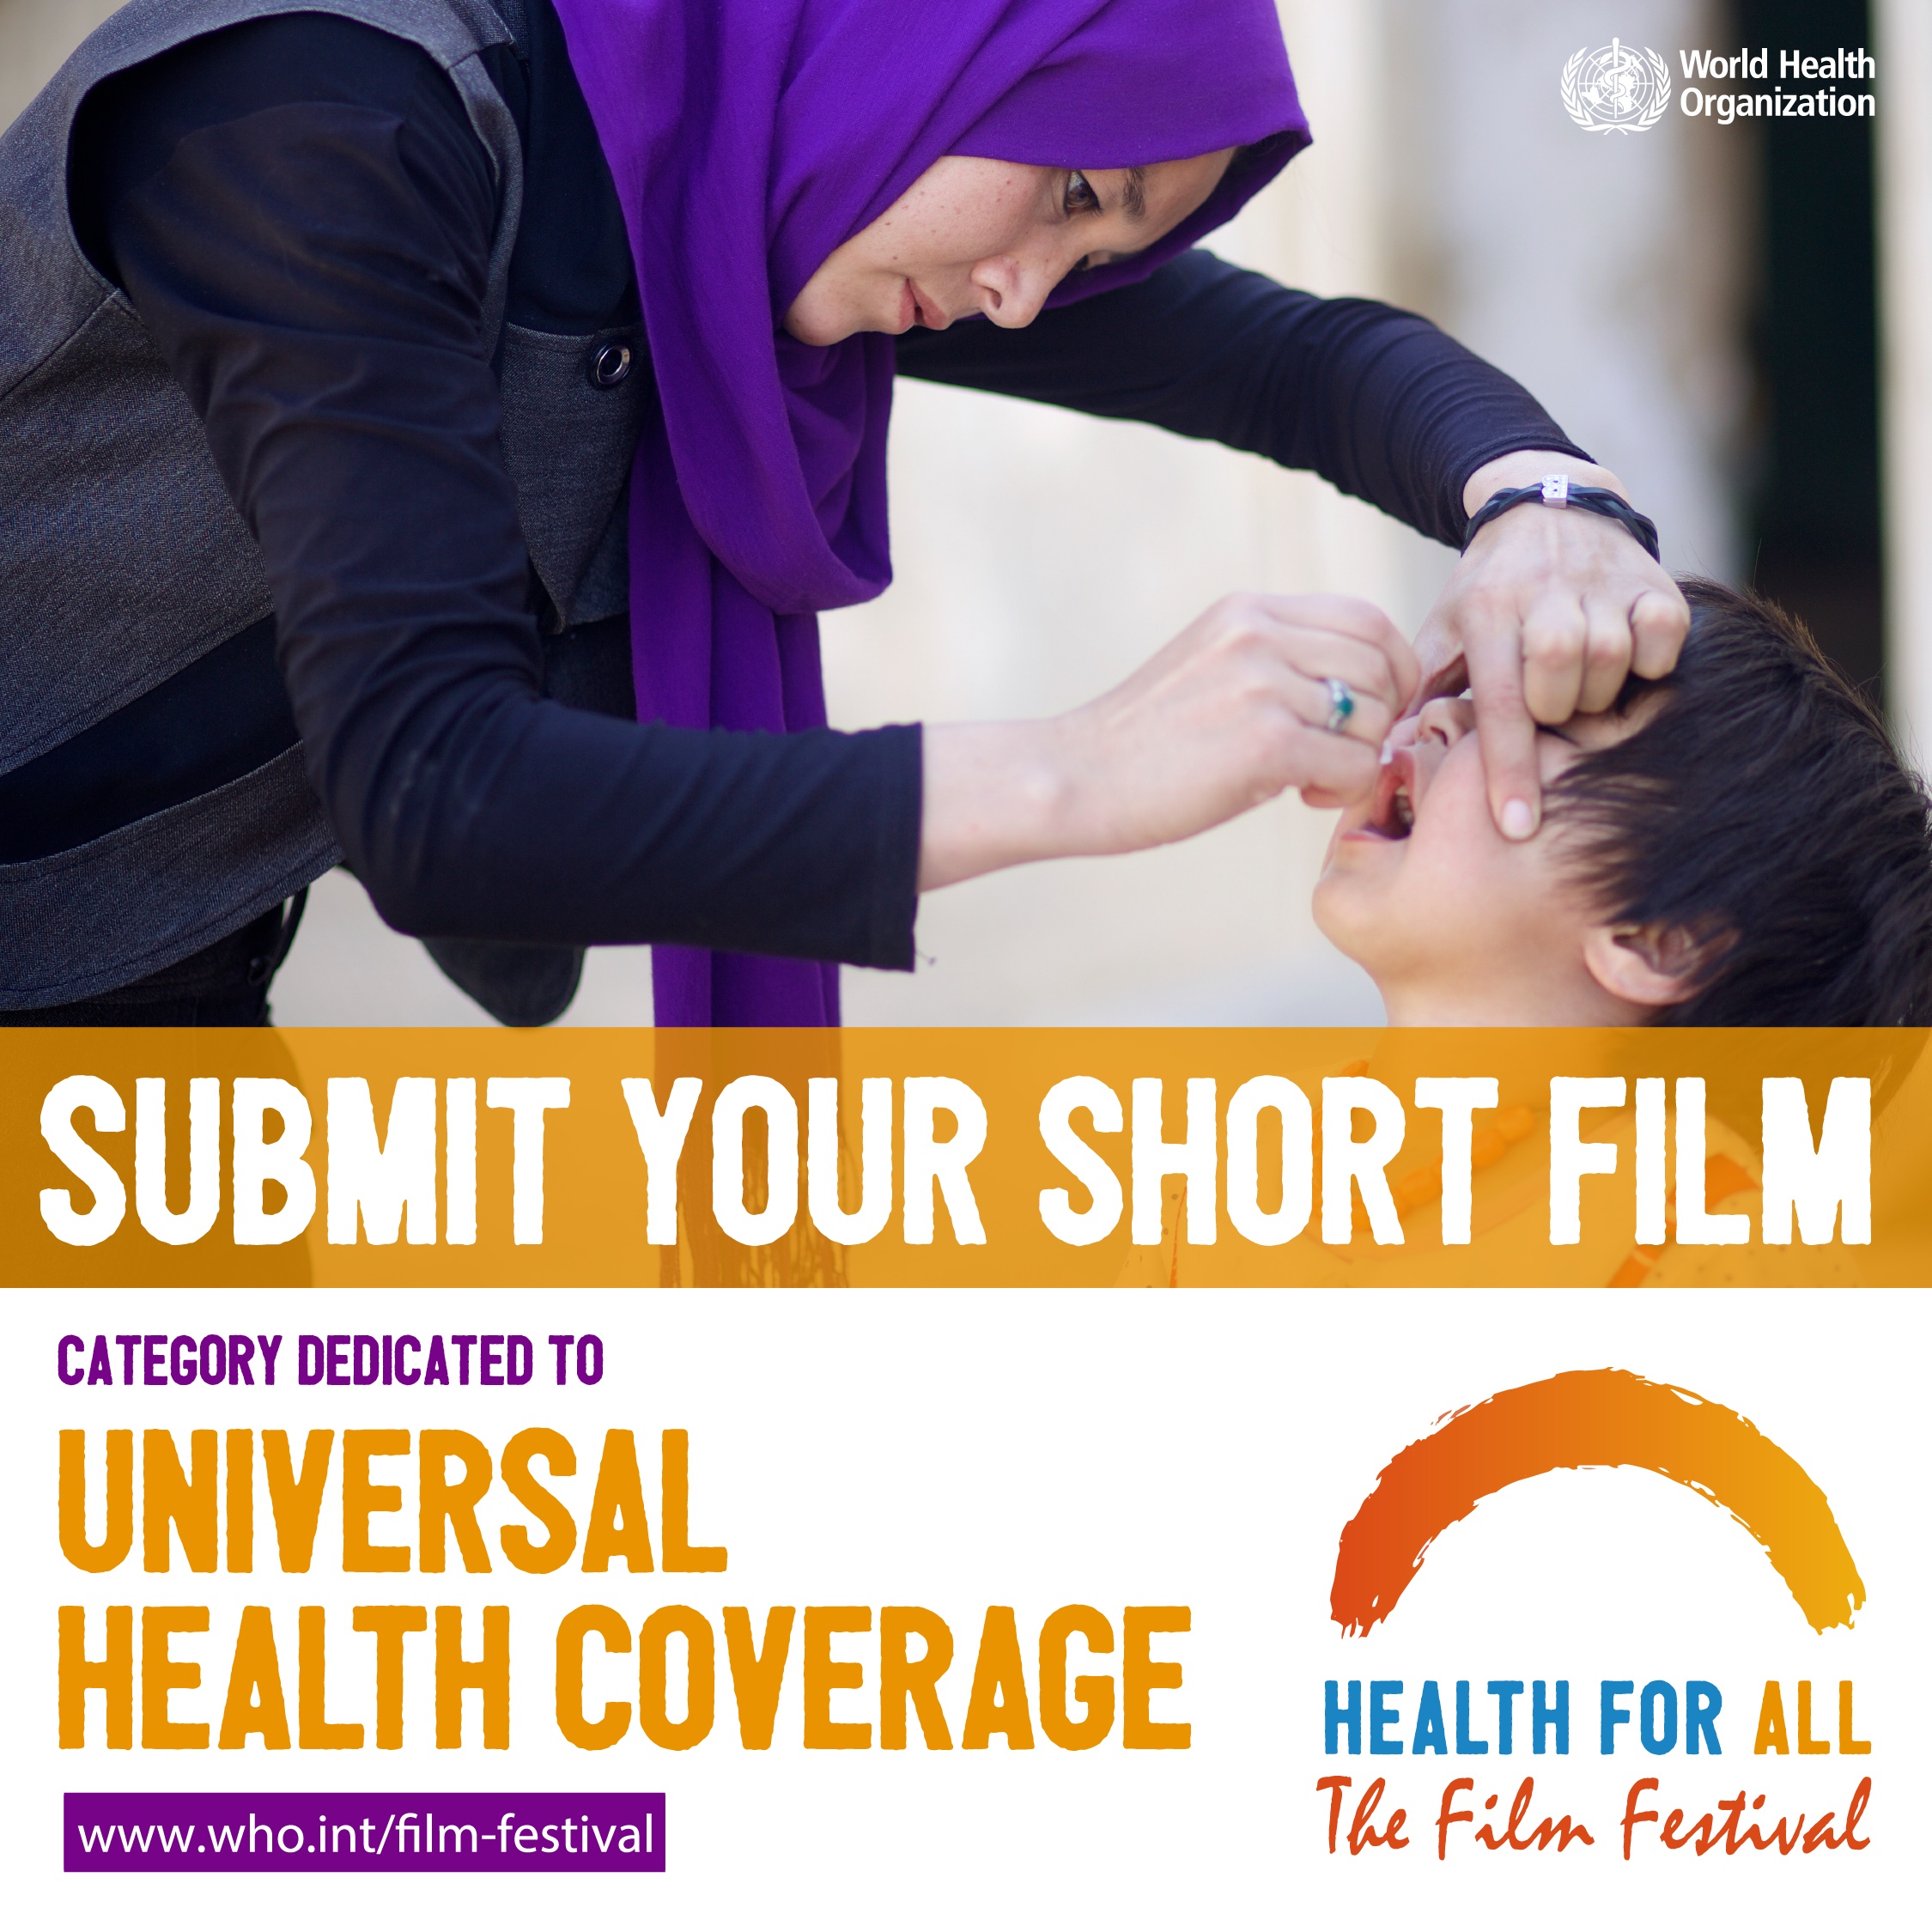 WHO film festival poster on the universal health coverage category